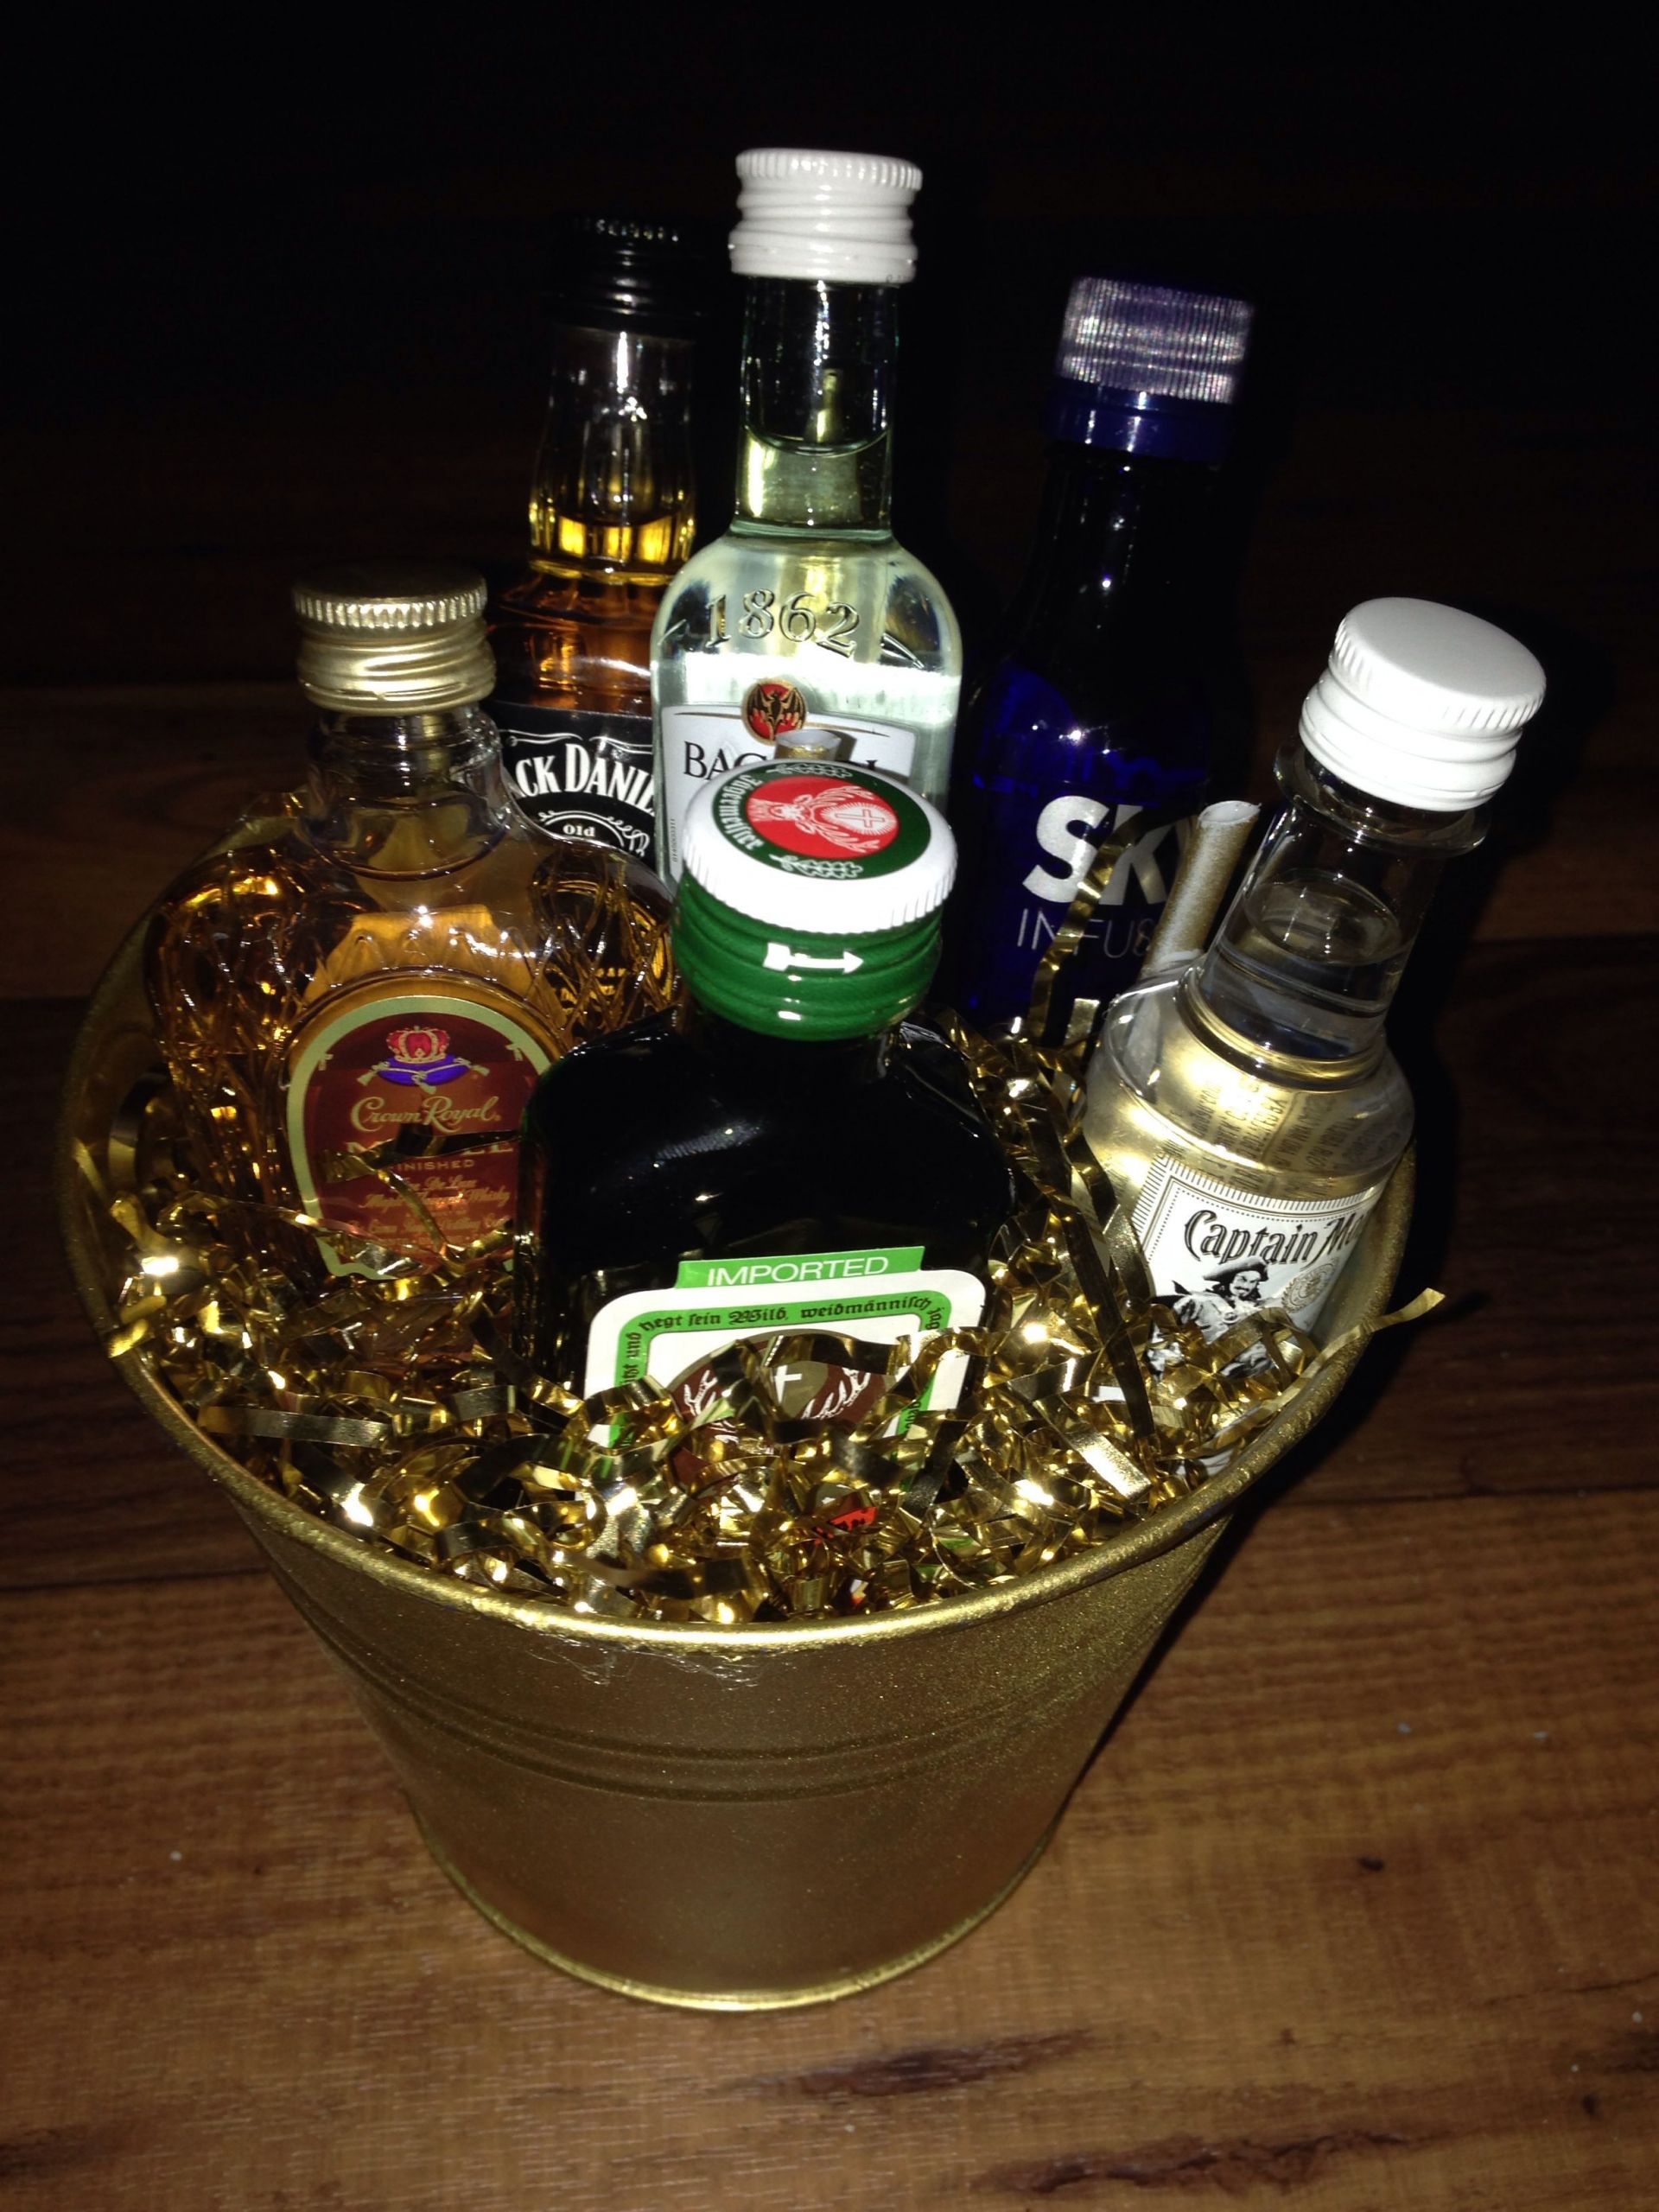 Stock The Bar Gift Basket Ideas
 Mini Bottle Bouquet Stock The Bar Gifts for Men 21st